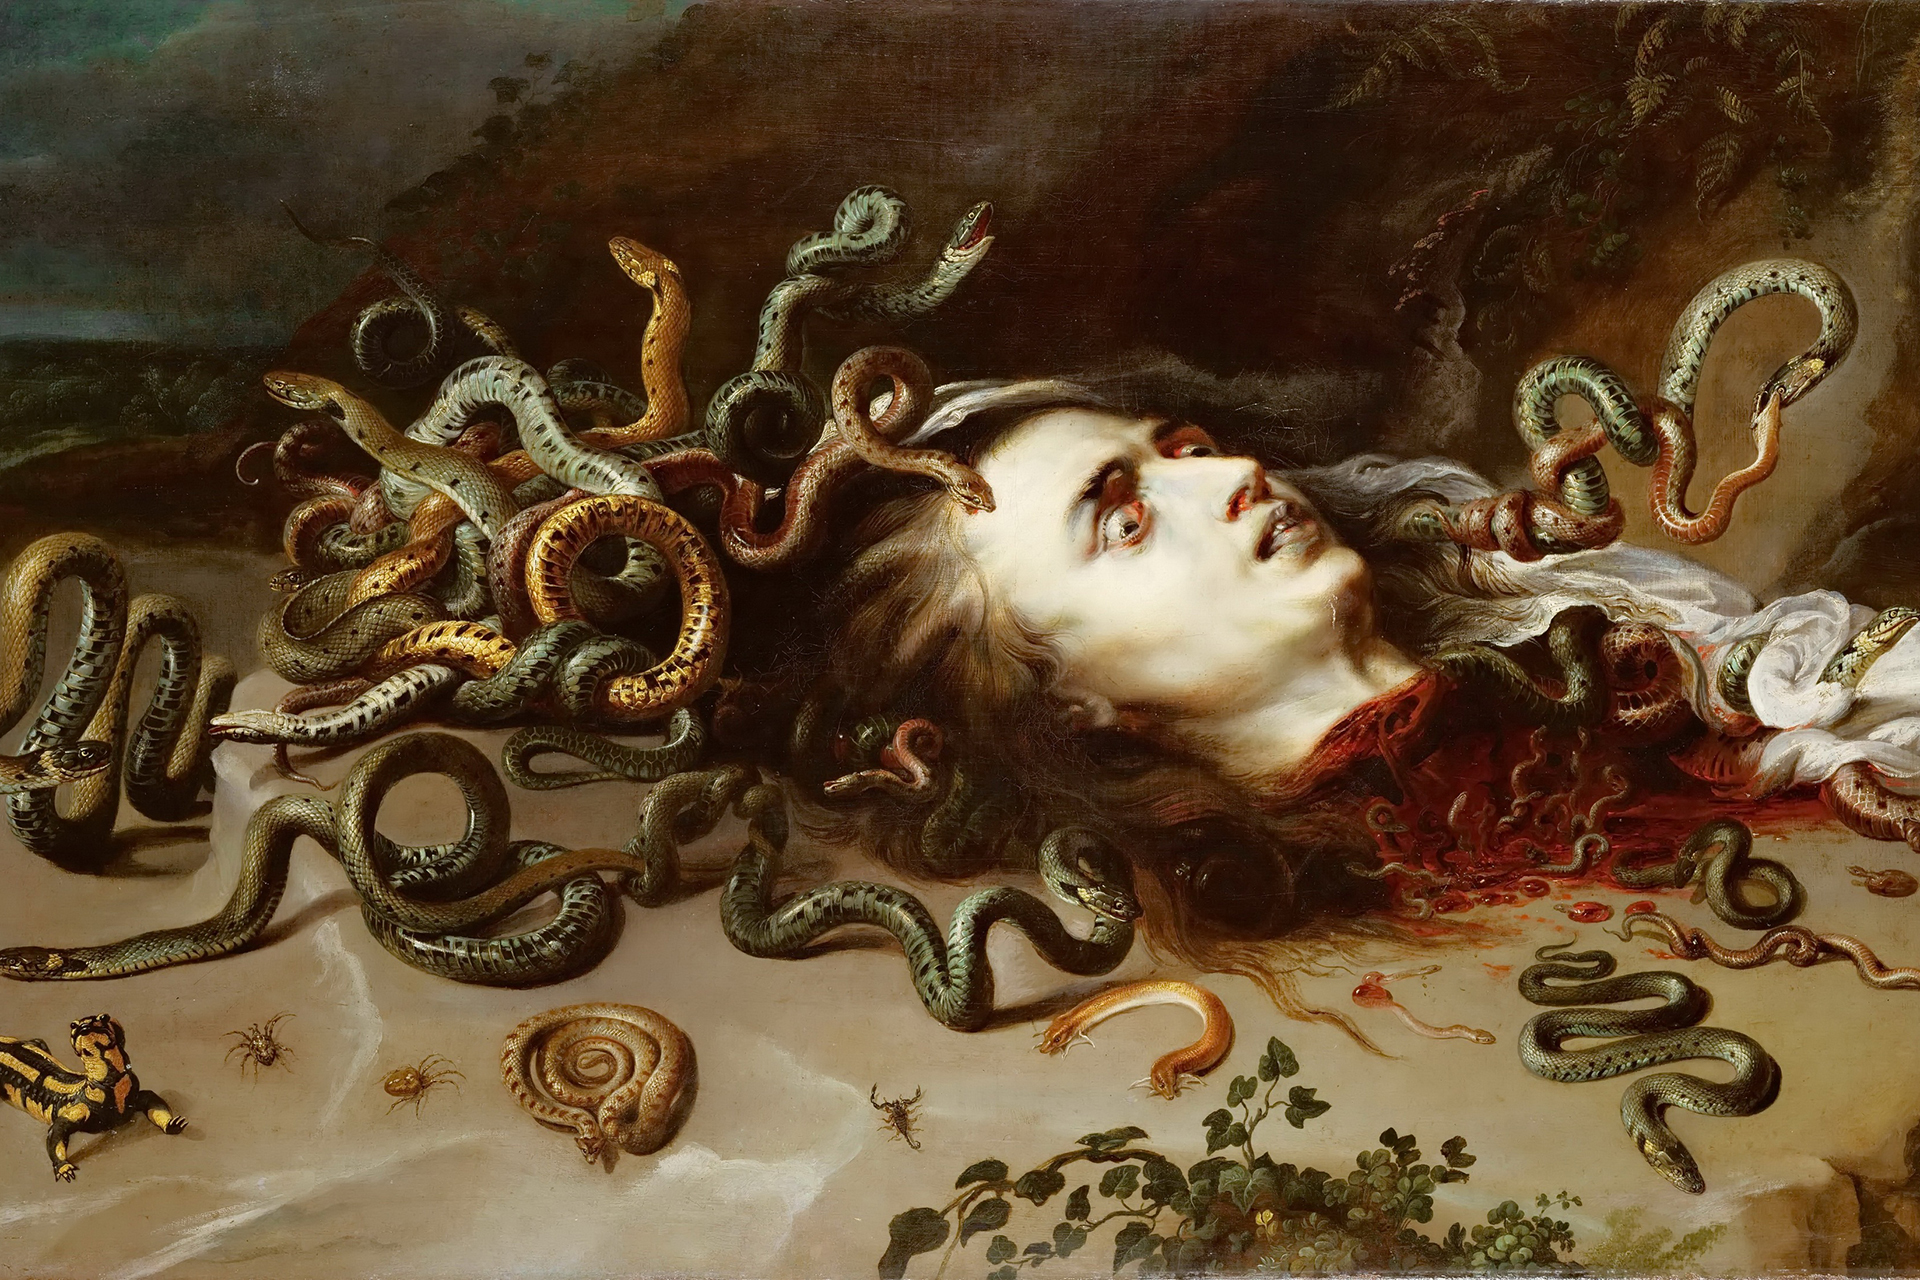 Medusa Greek Myth: The Fascinating Story of the Snake-Haired Gorgon -  ConnollyCove